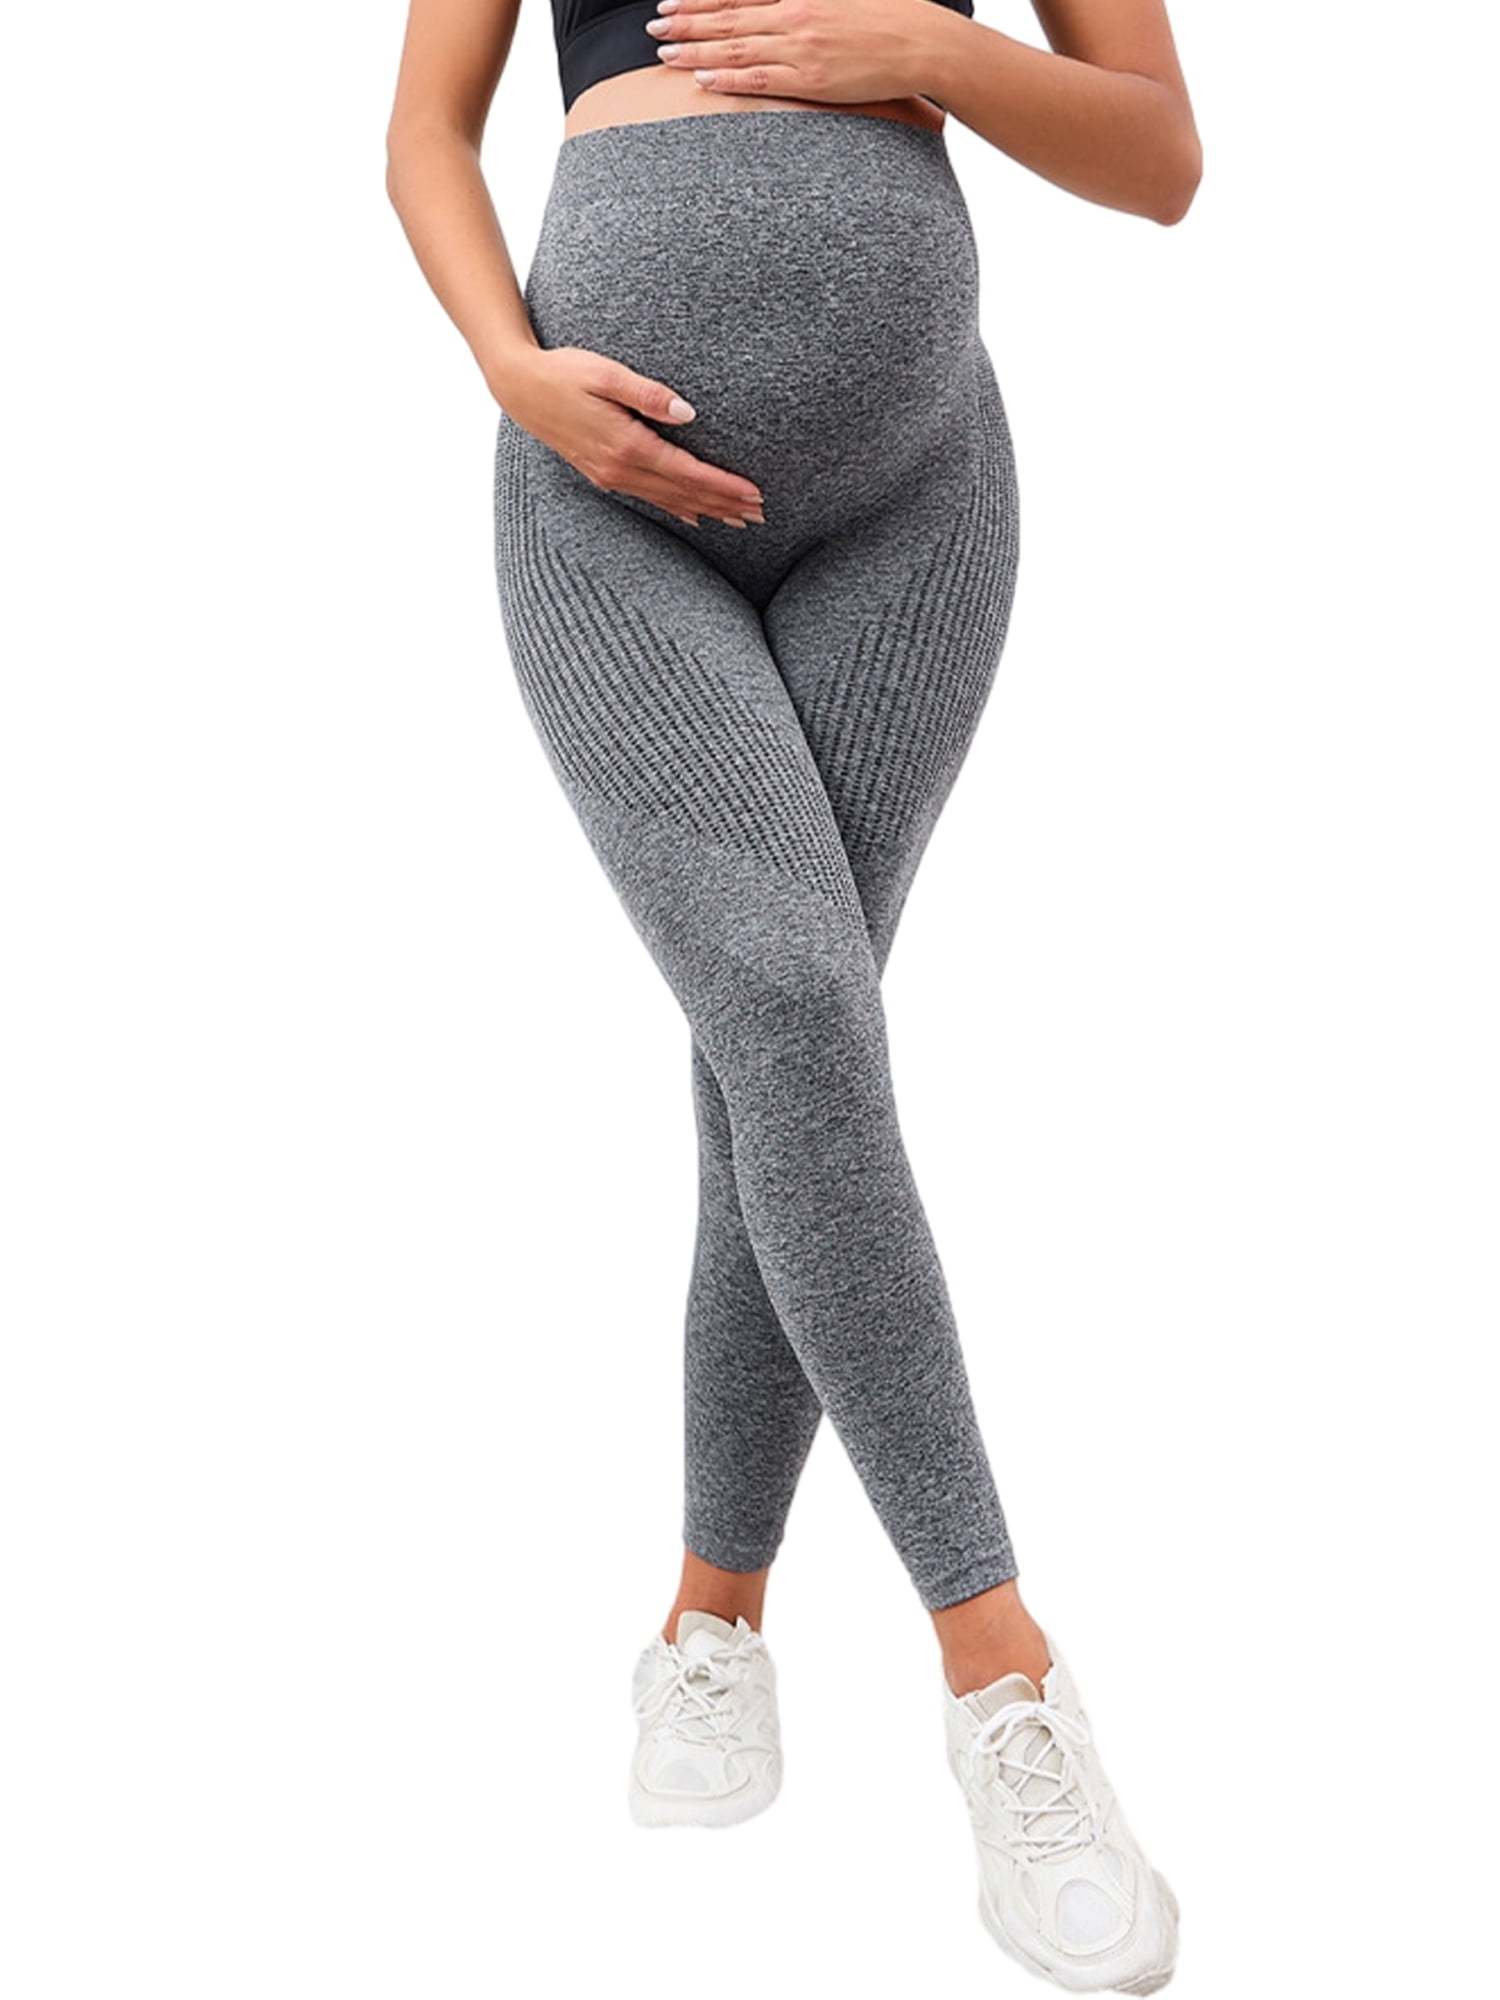 Sprifallbaby Women's Maternity Workout Leggings Soft Knit Belly